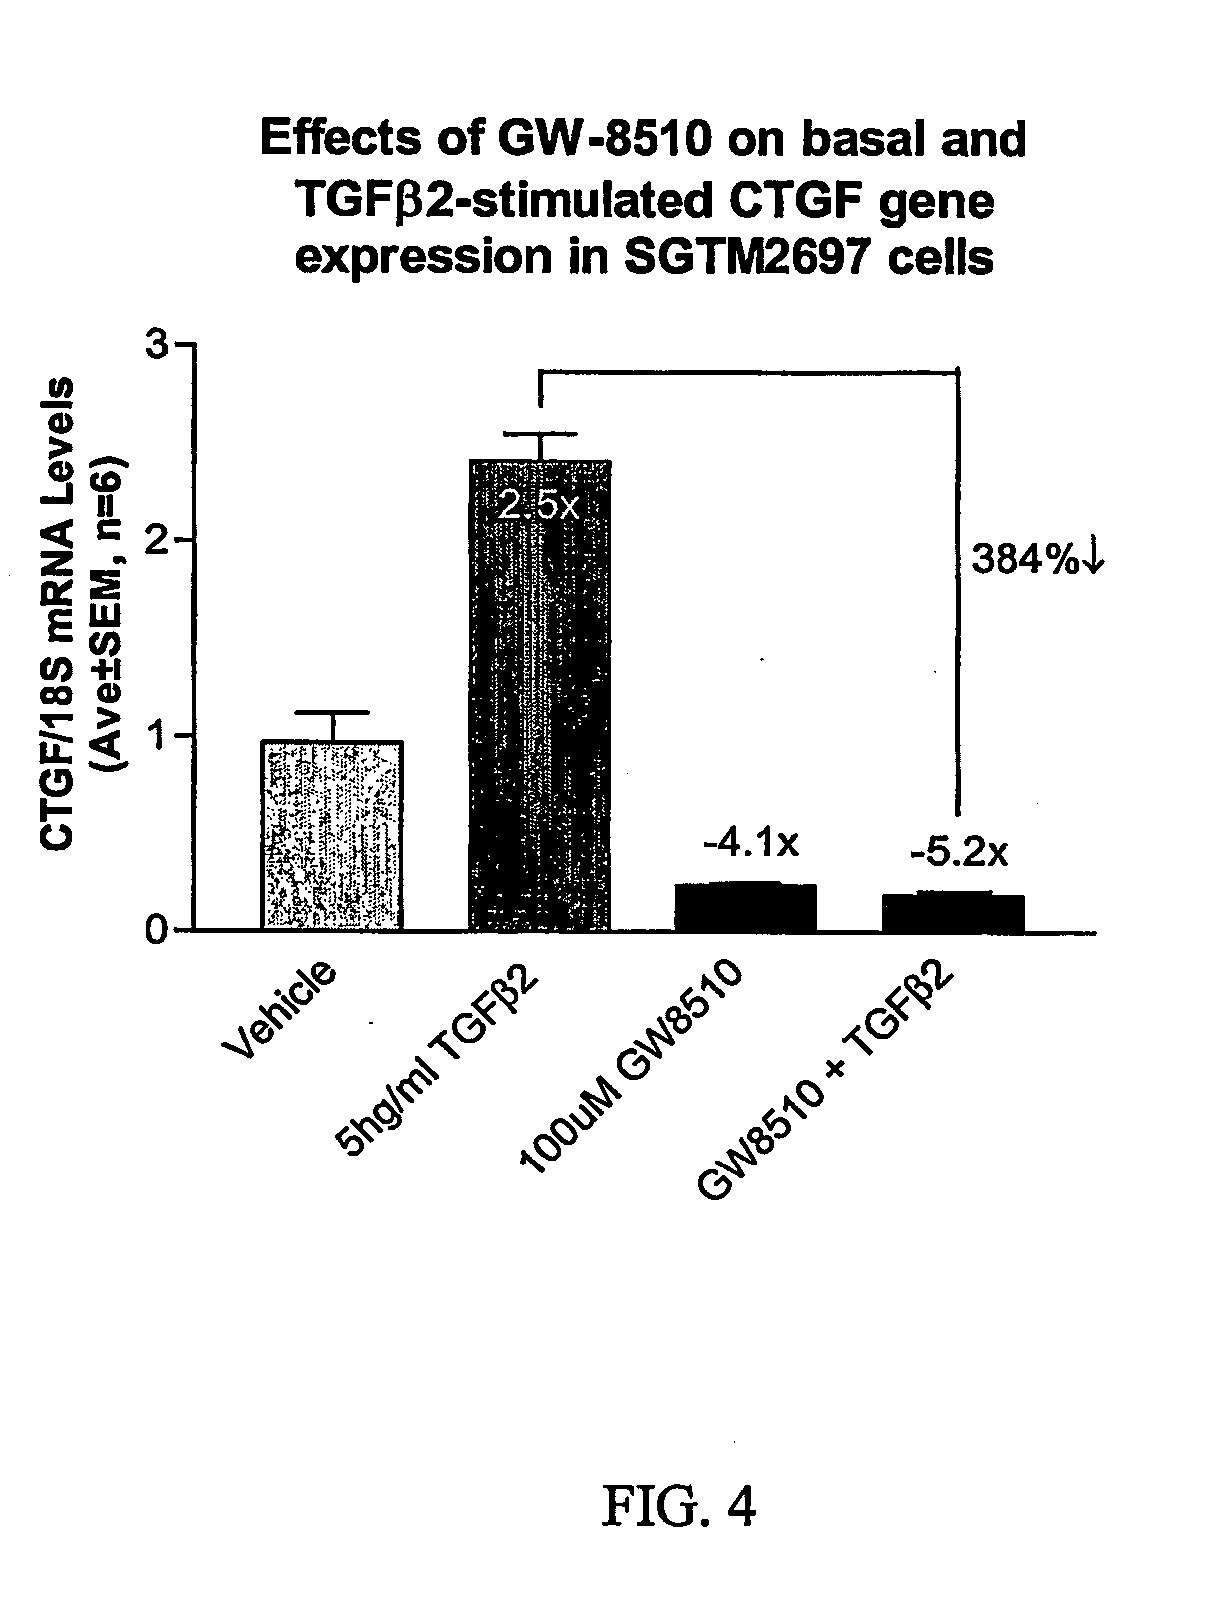 Agents which regulate, inhibit, or modulate the activity and/or expression of connective tissue growth factor (ctgf) as a unique means to both lower intraocular pressure and treat glaucomatous retinopathies/optic neuropathies